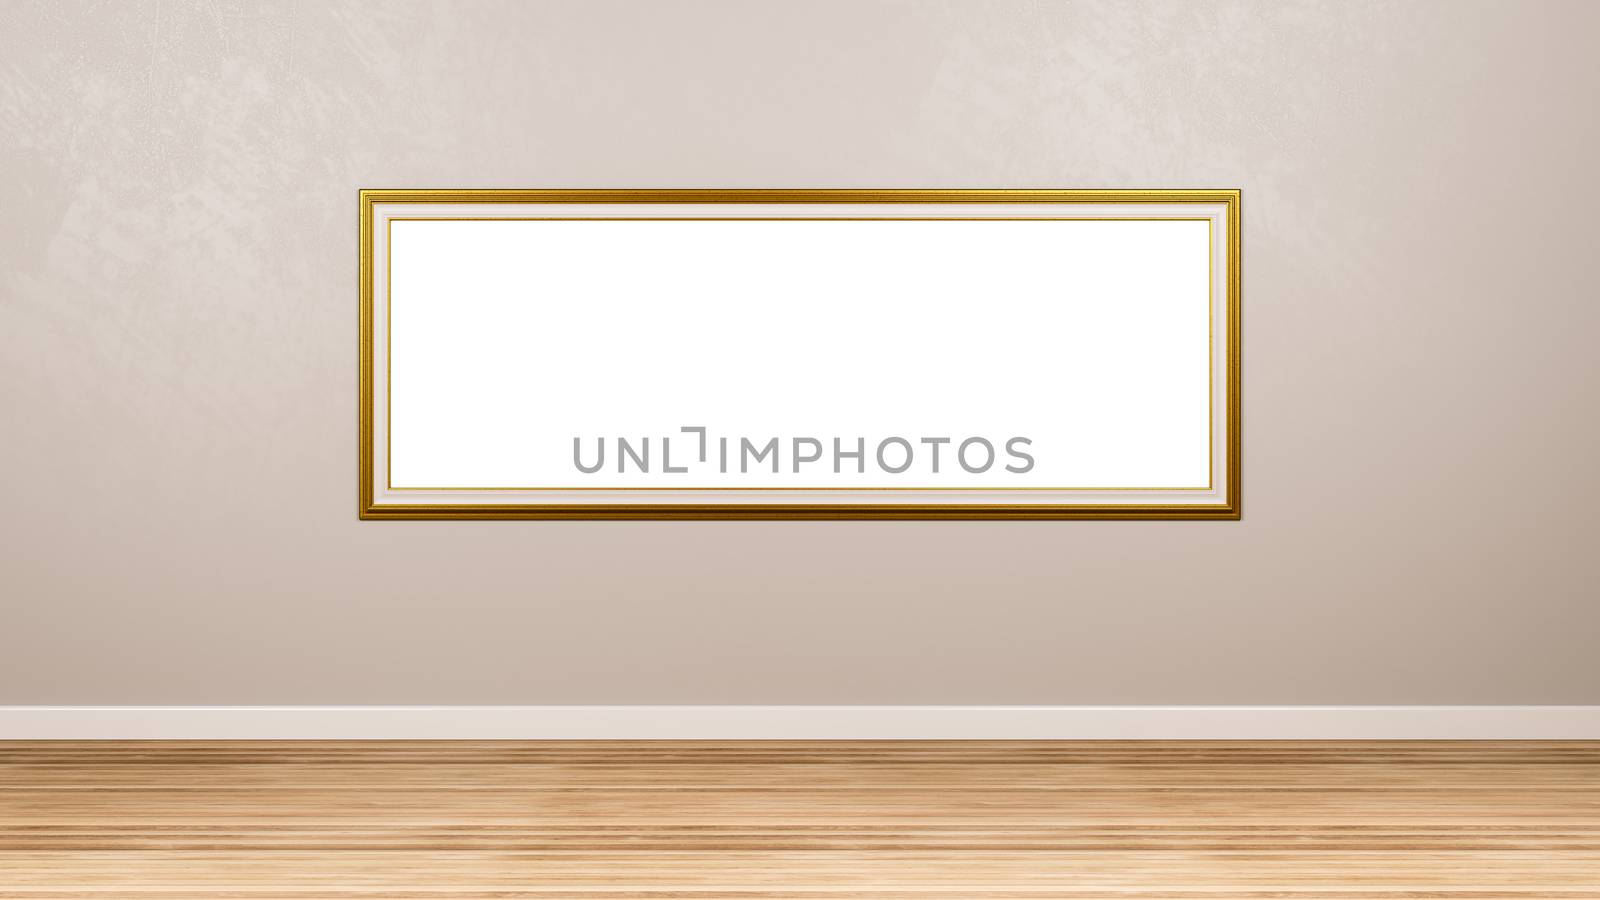 Classic Rectangular Panoramic Empty Golden Picture Frame at the Wall in the Room with Copyspace 3D Render